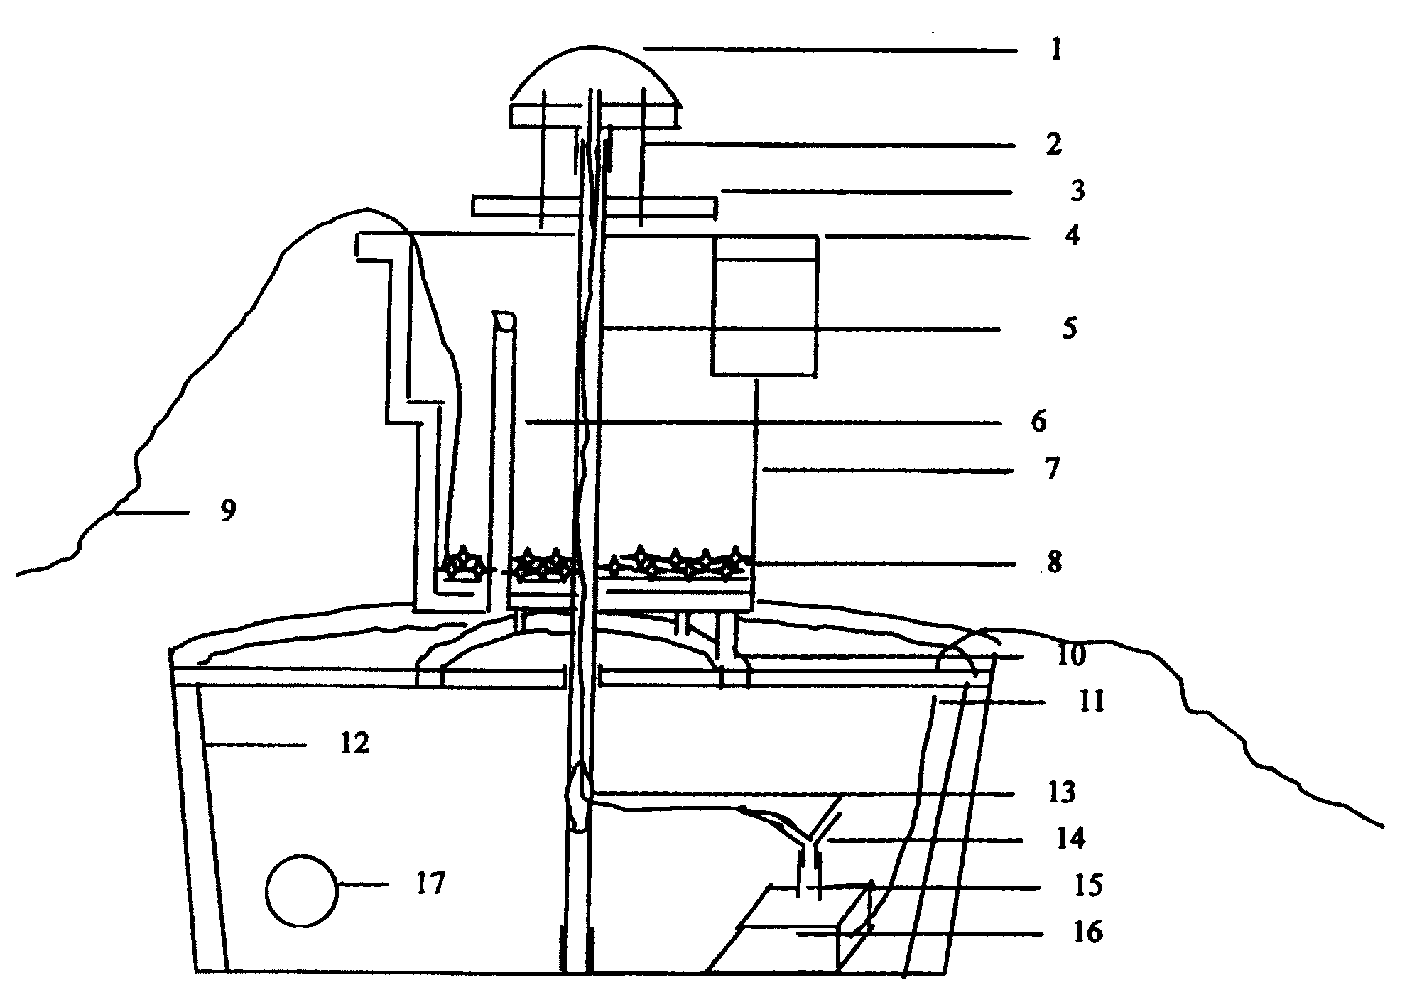 Illumination apparatus for plant root system and method thereof